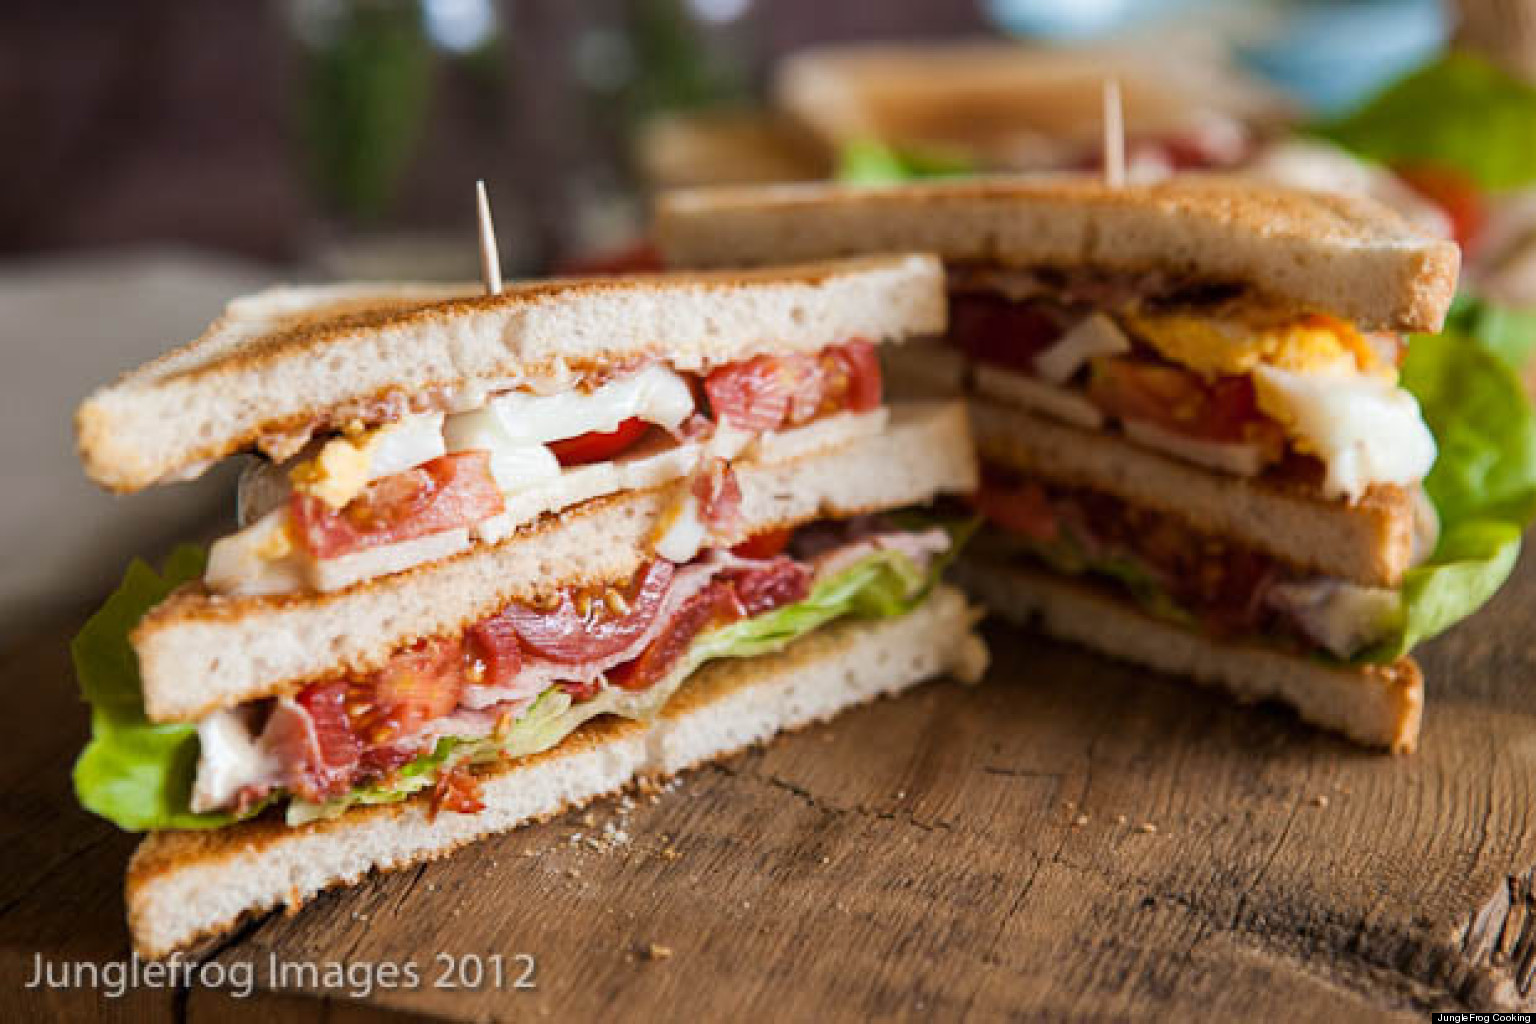 Club Sandwich Recipes: Turkey Is Amazing, But We Want More Variety ...